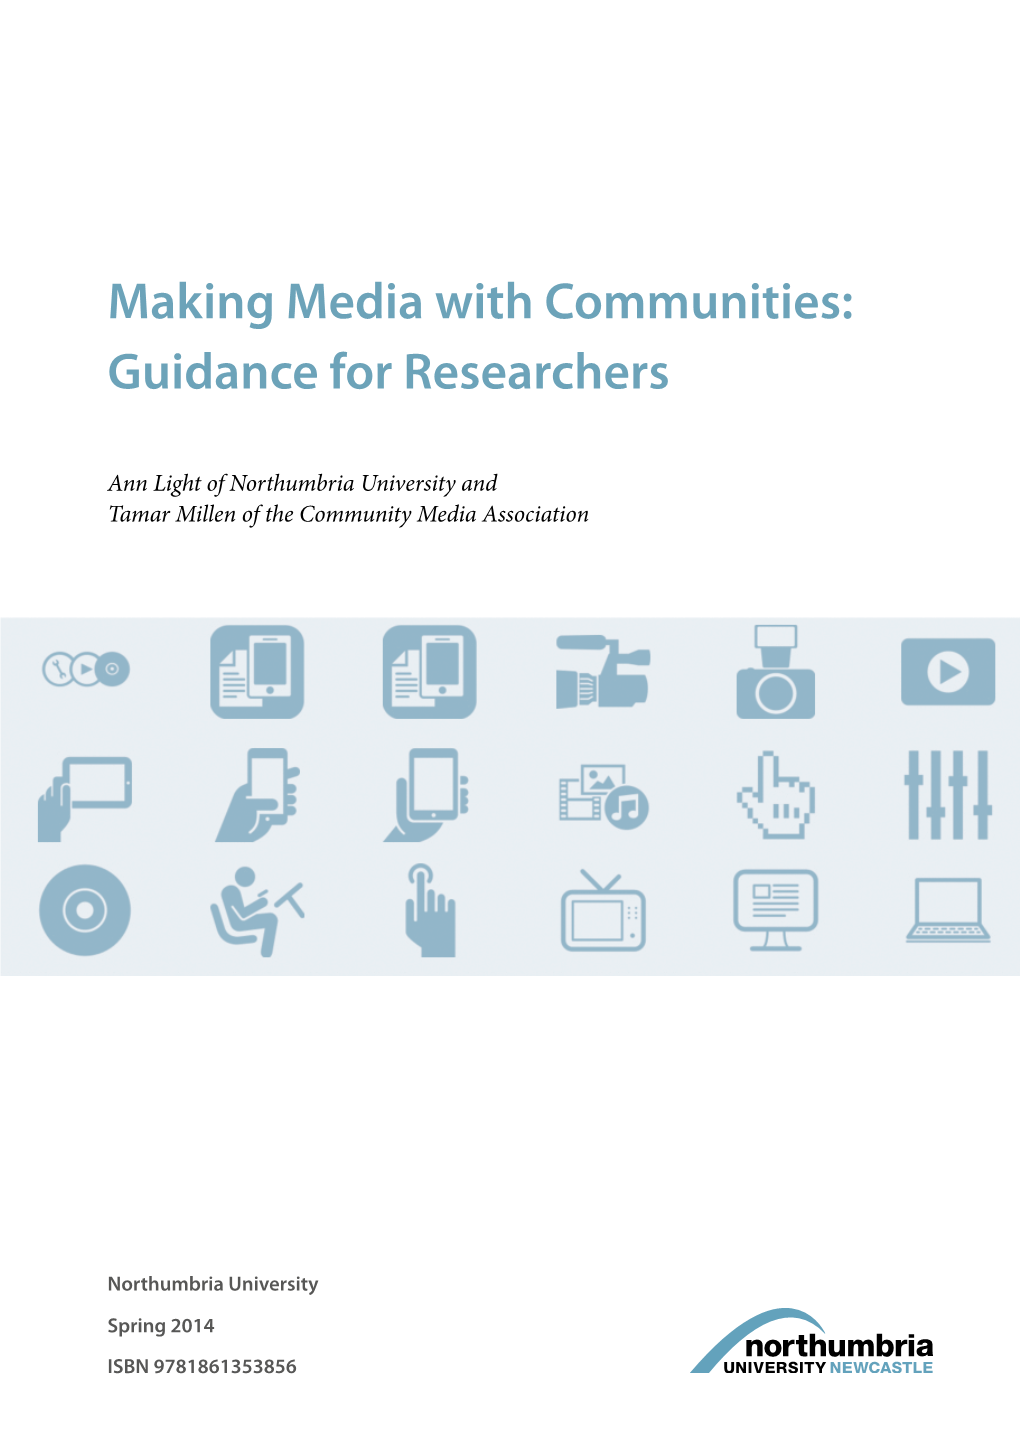 Making Media with Communities: Guidance for Researchers